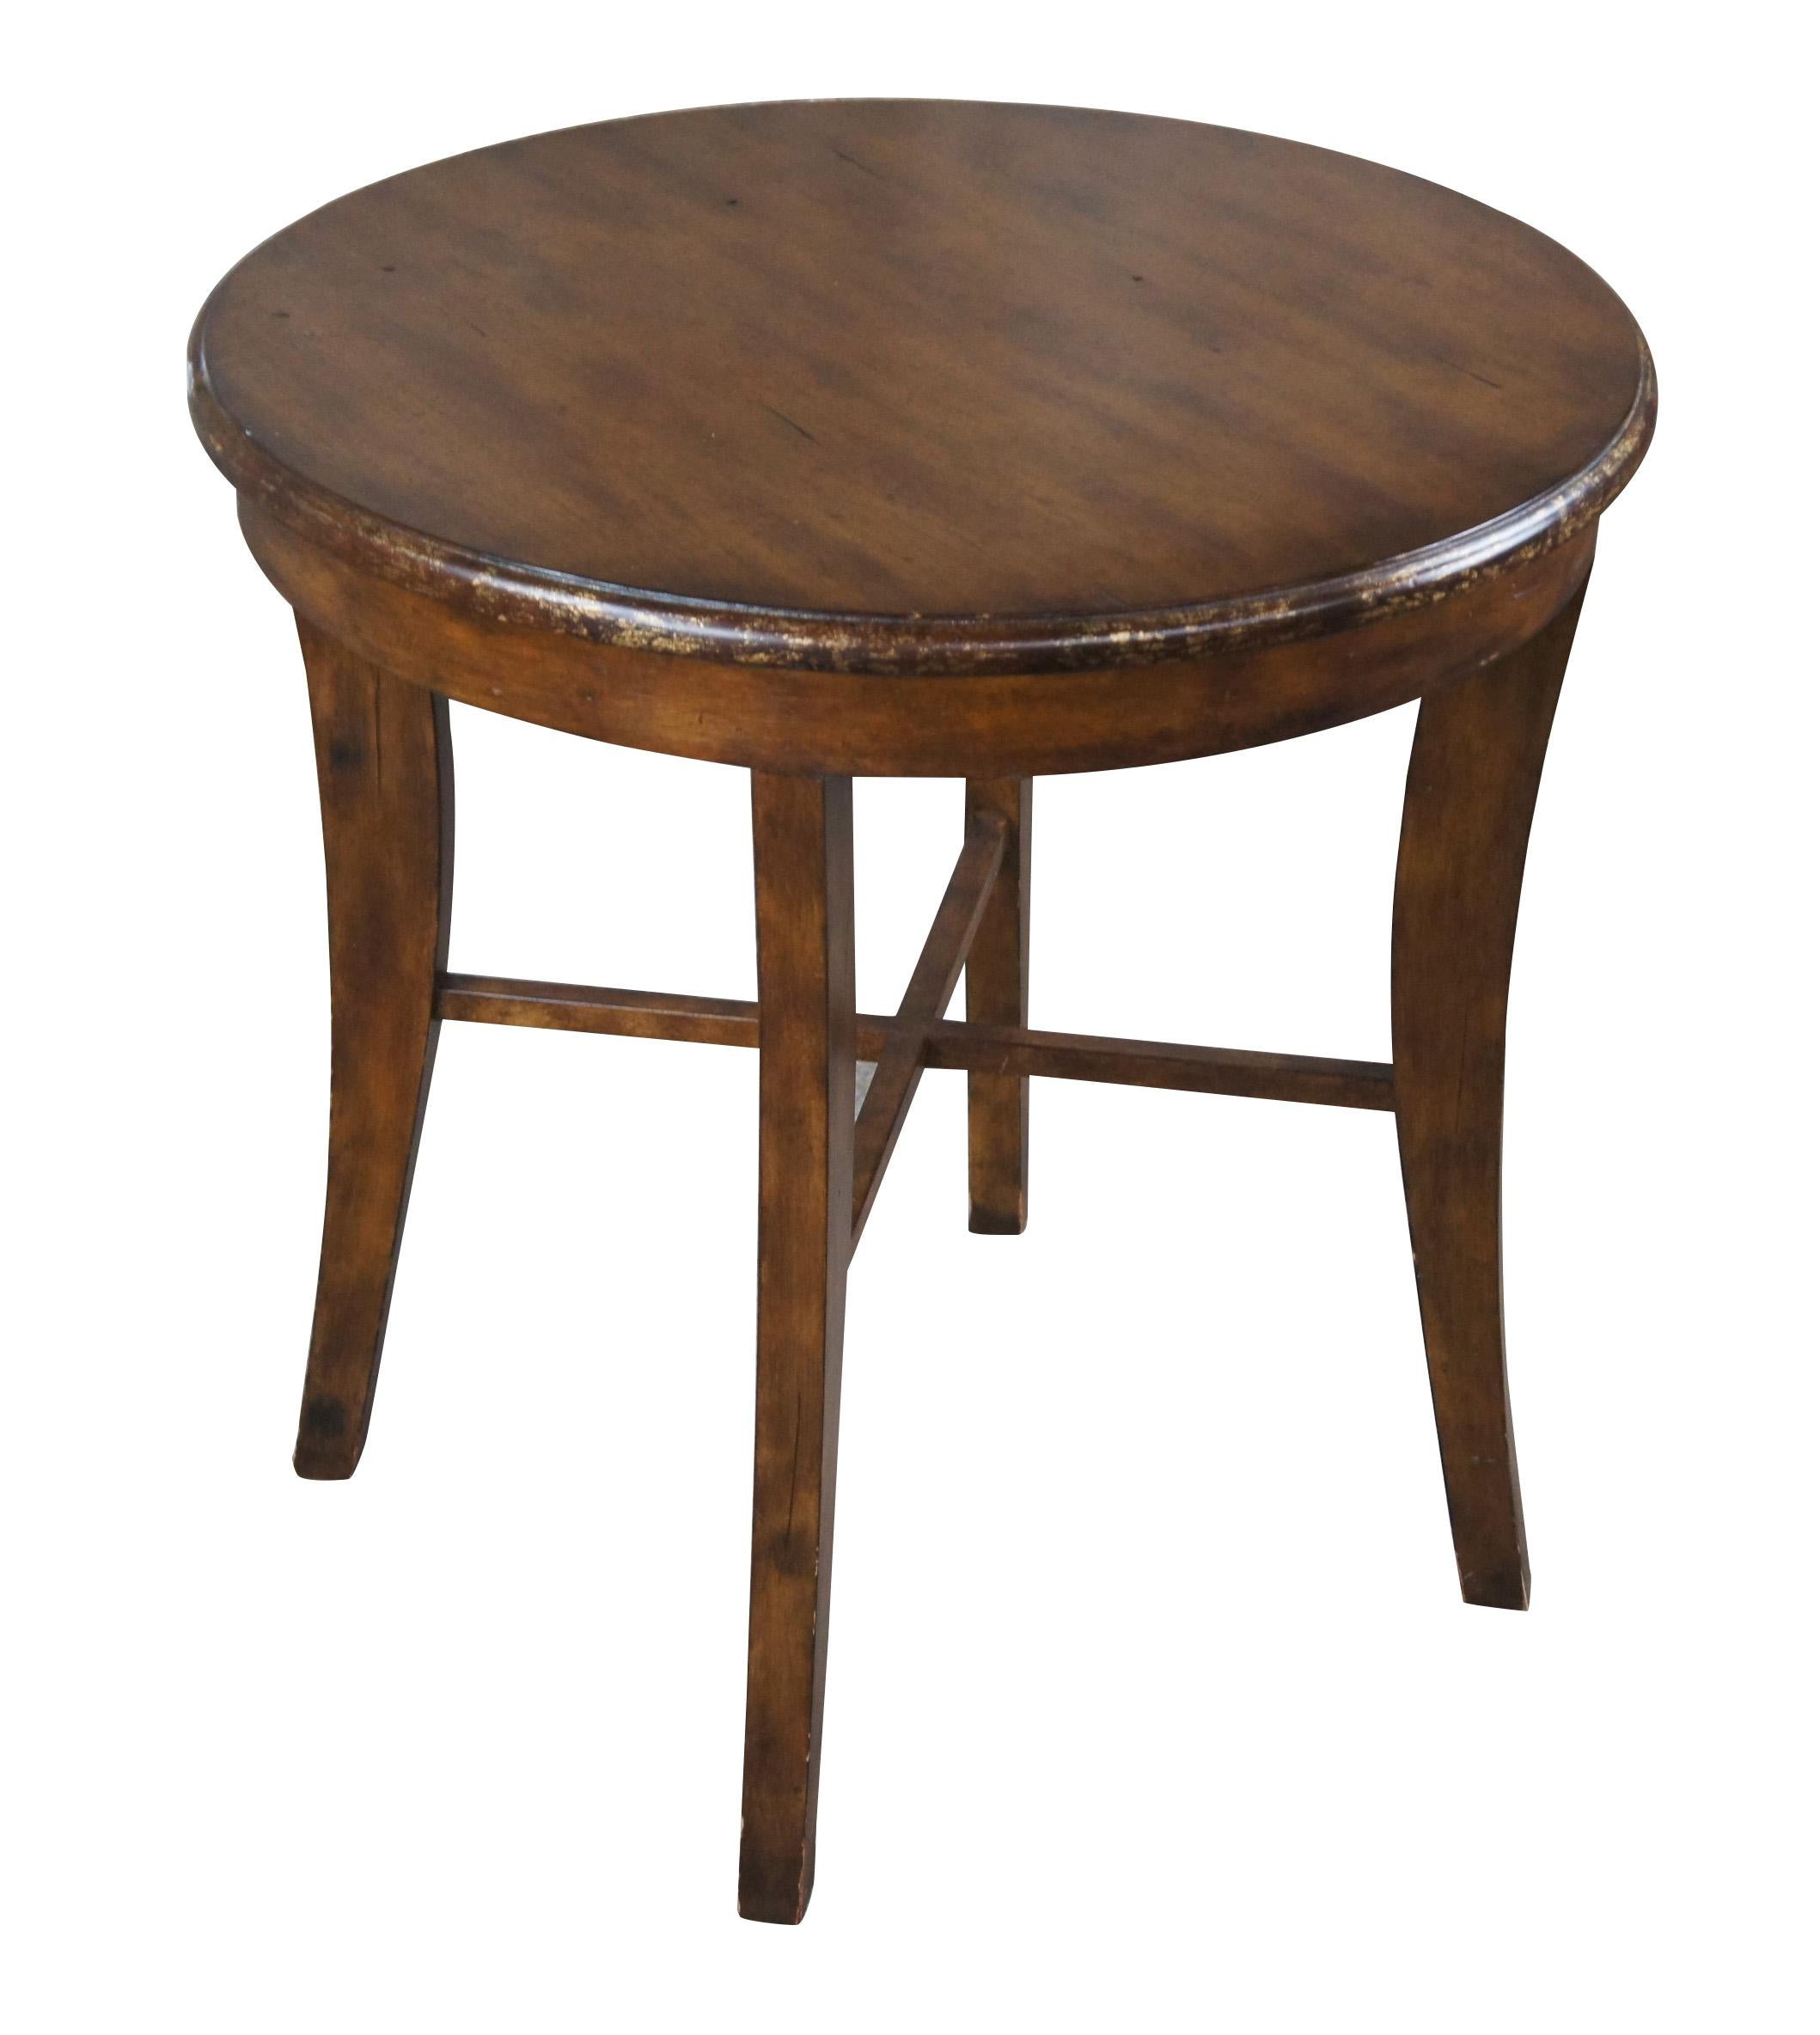 Vintage mahogany finished  center or accent table featuring round form with an antiqued rubbed gold paint edge over four legs connected by x support and slightly flared legs.

Dimensions:
27